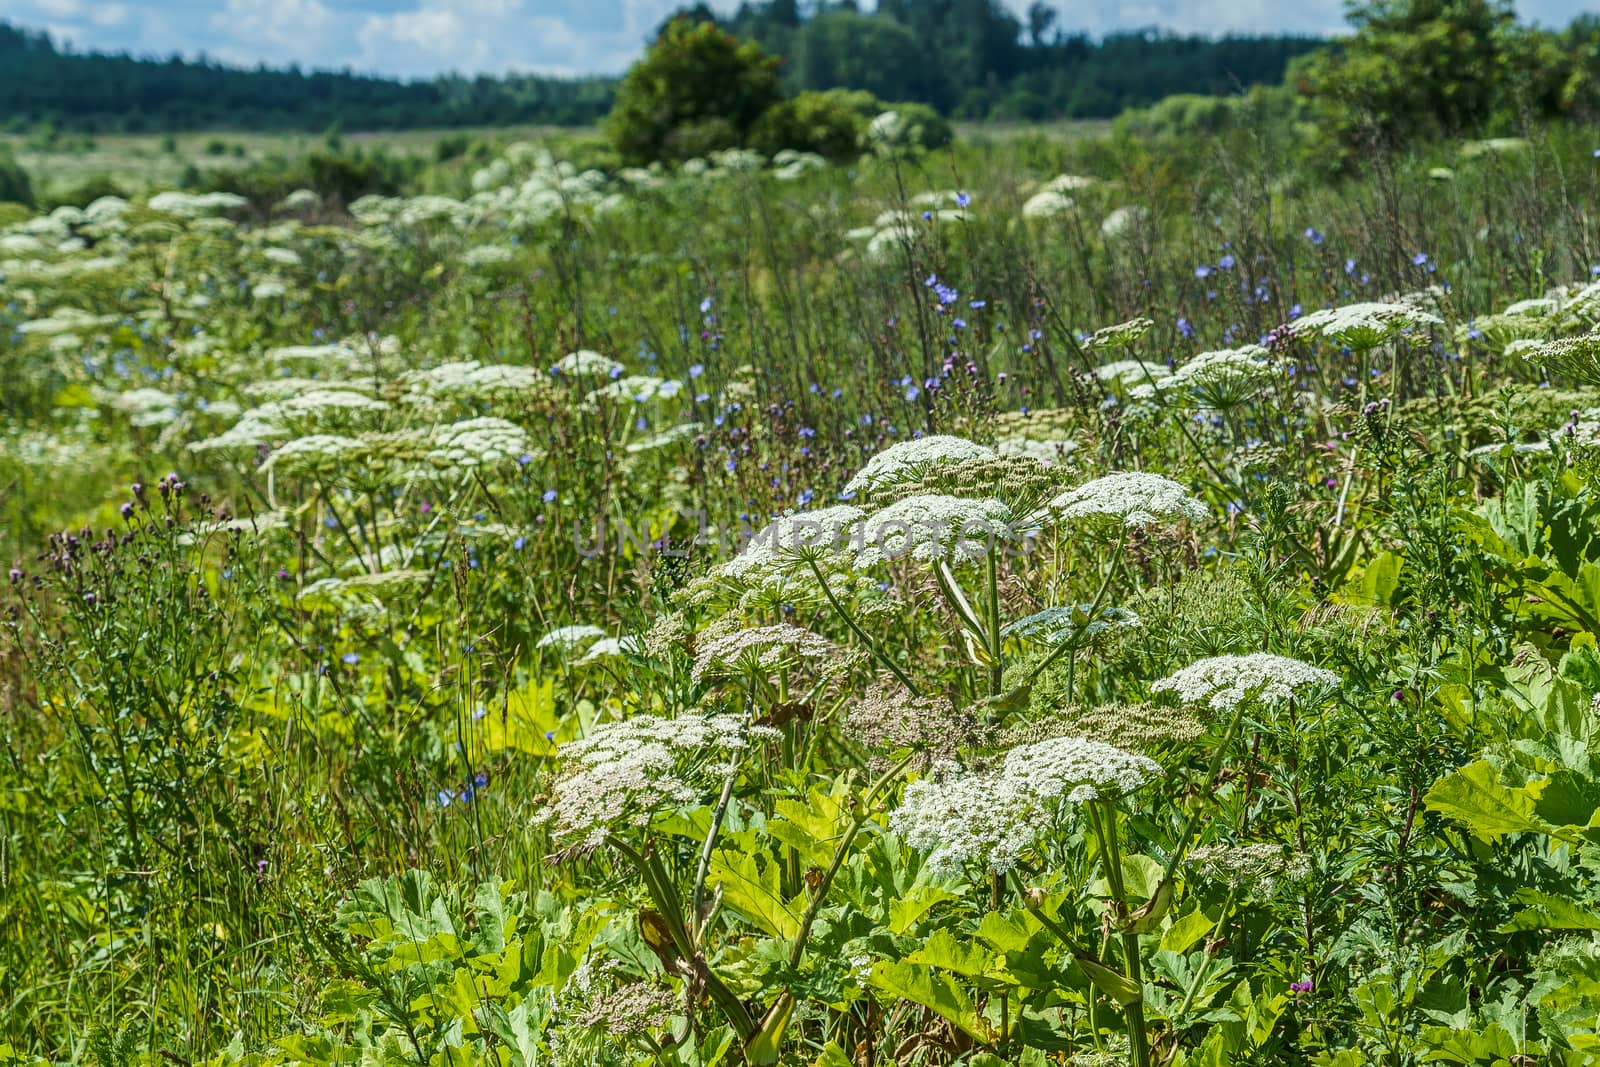 hogweed in a field on a sunny summer day, several inflorescences in the grass thickets